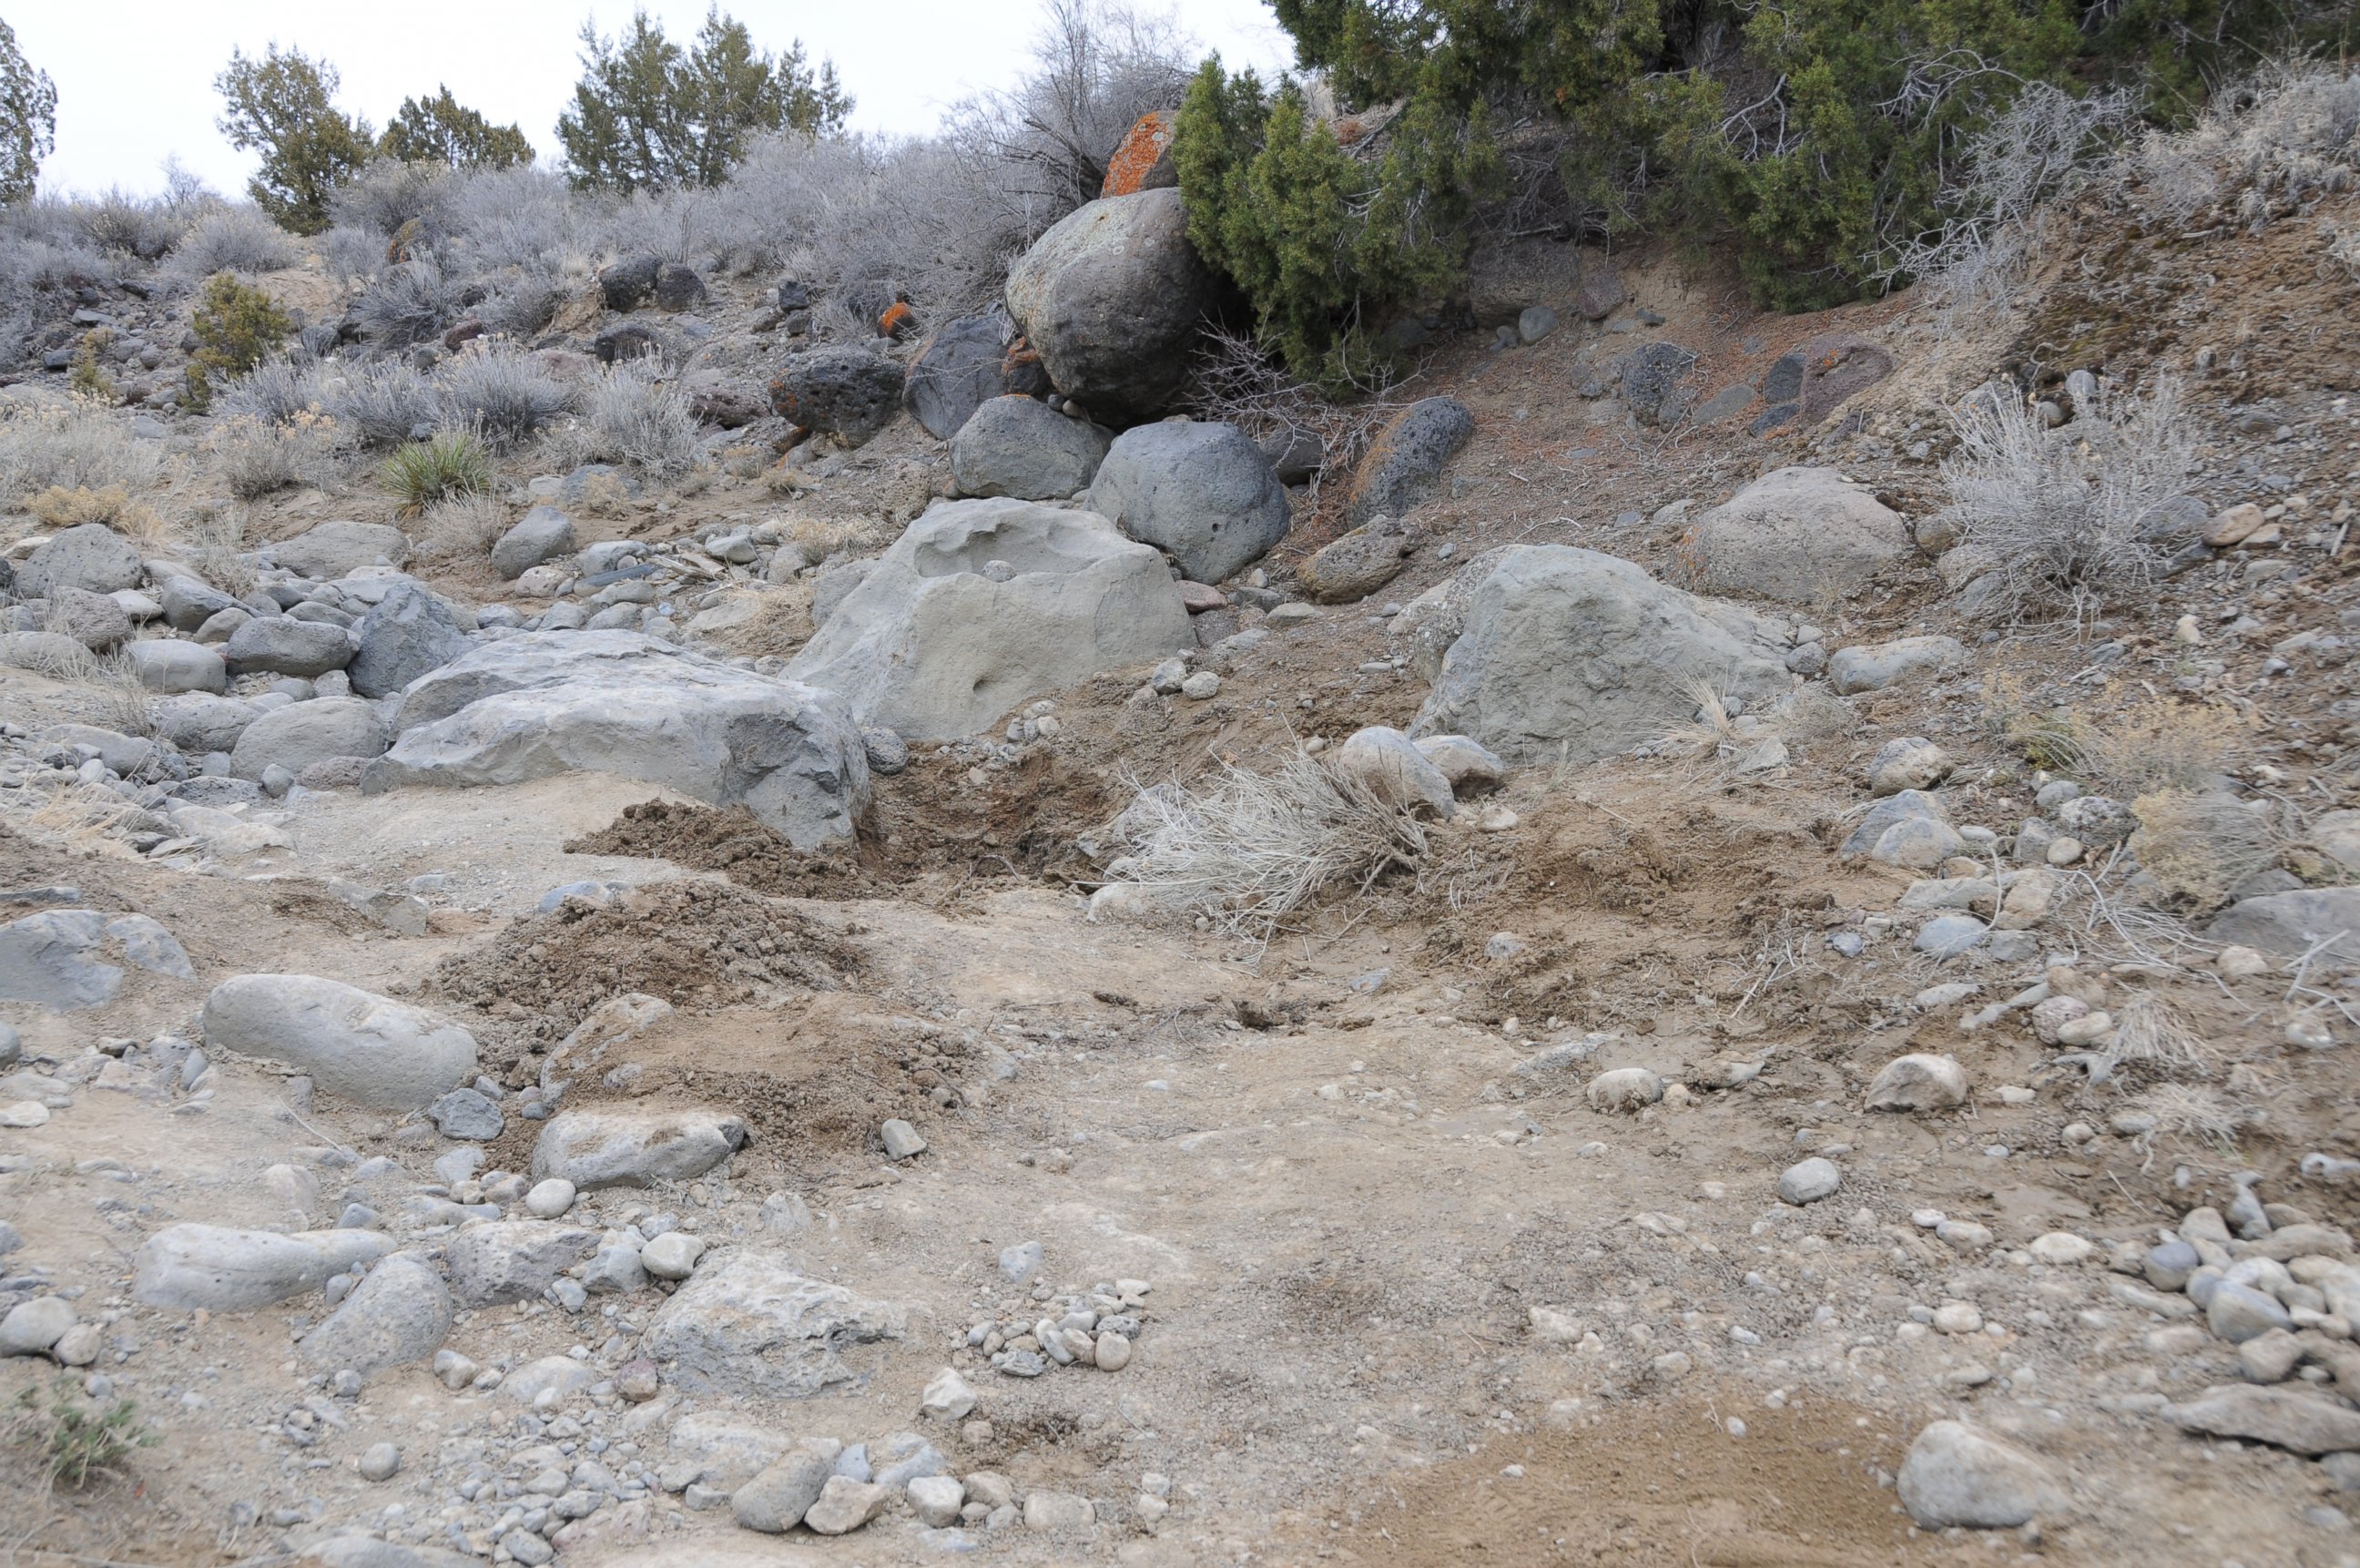 PHOTO: A hiker discovered skeletal remains in a gulch, pictured here, that were later identified as Paige Birgfeld.